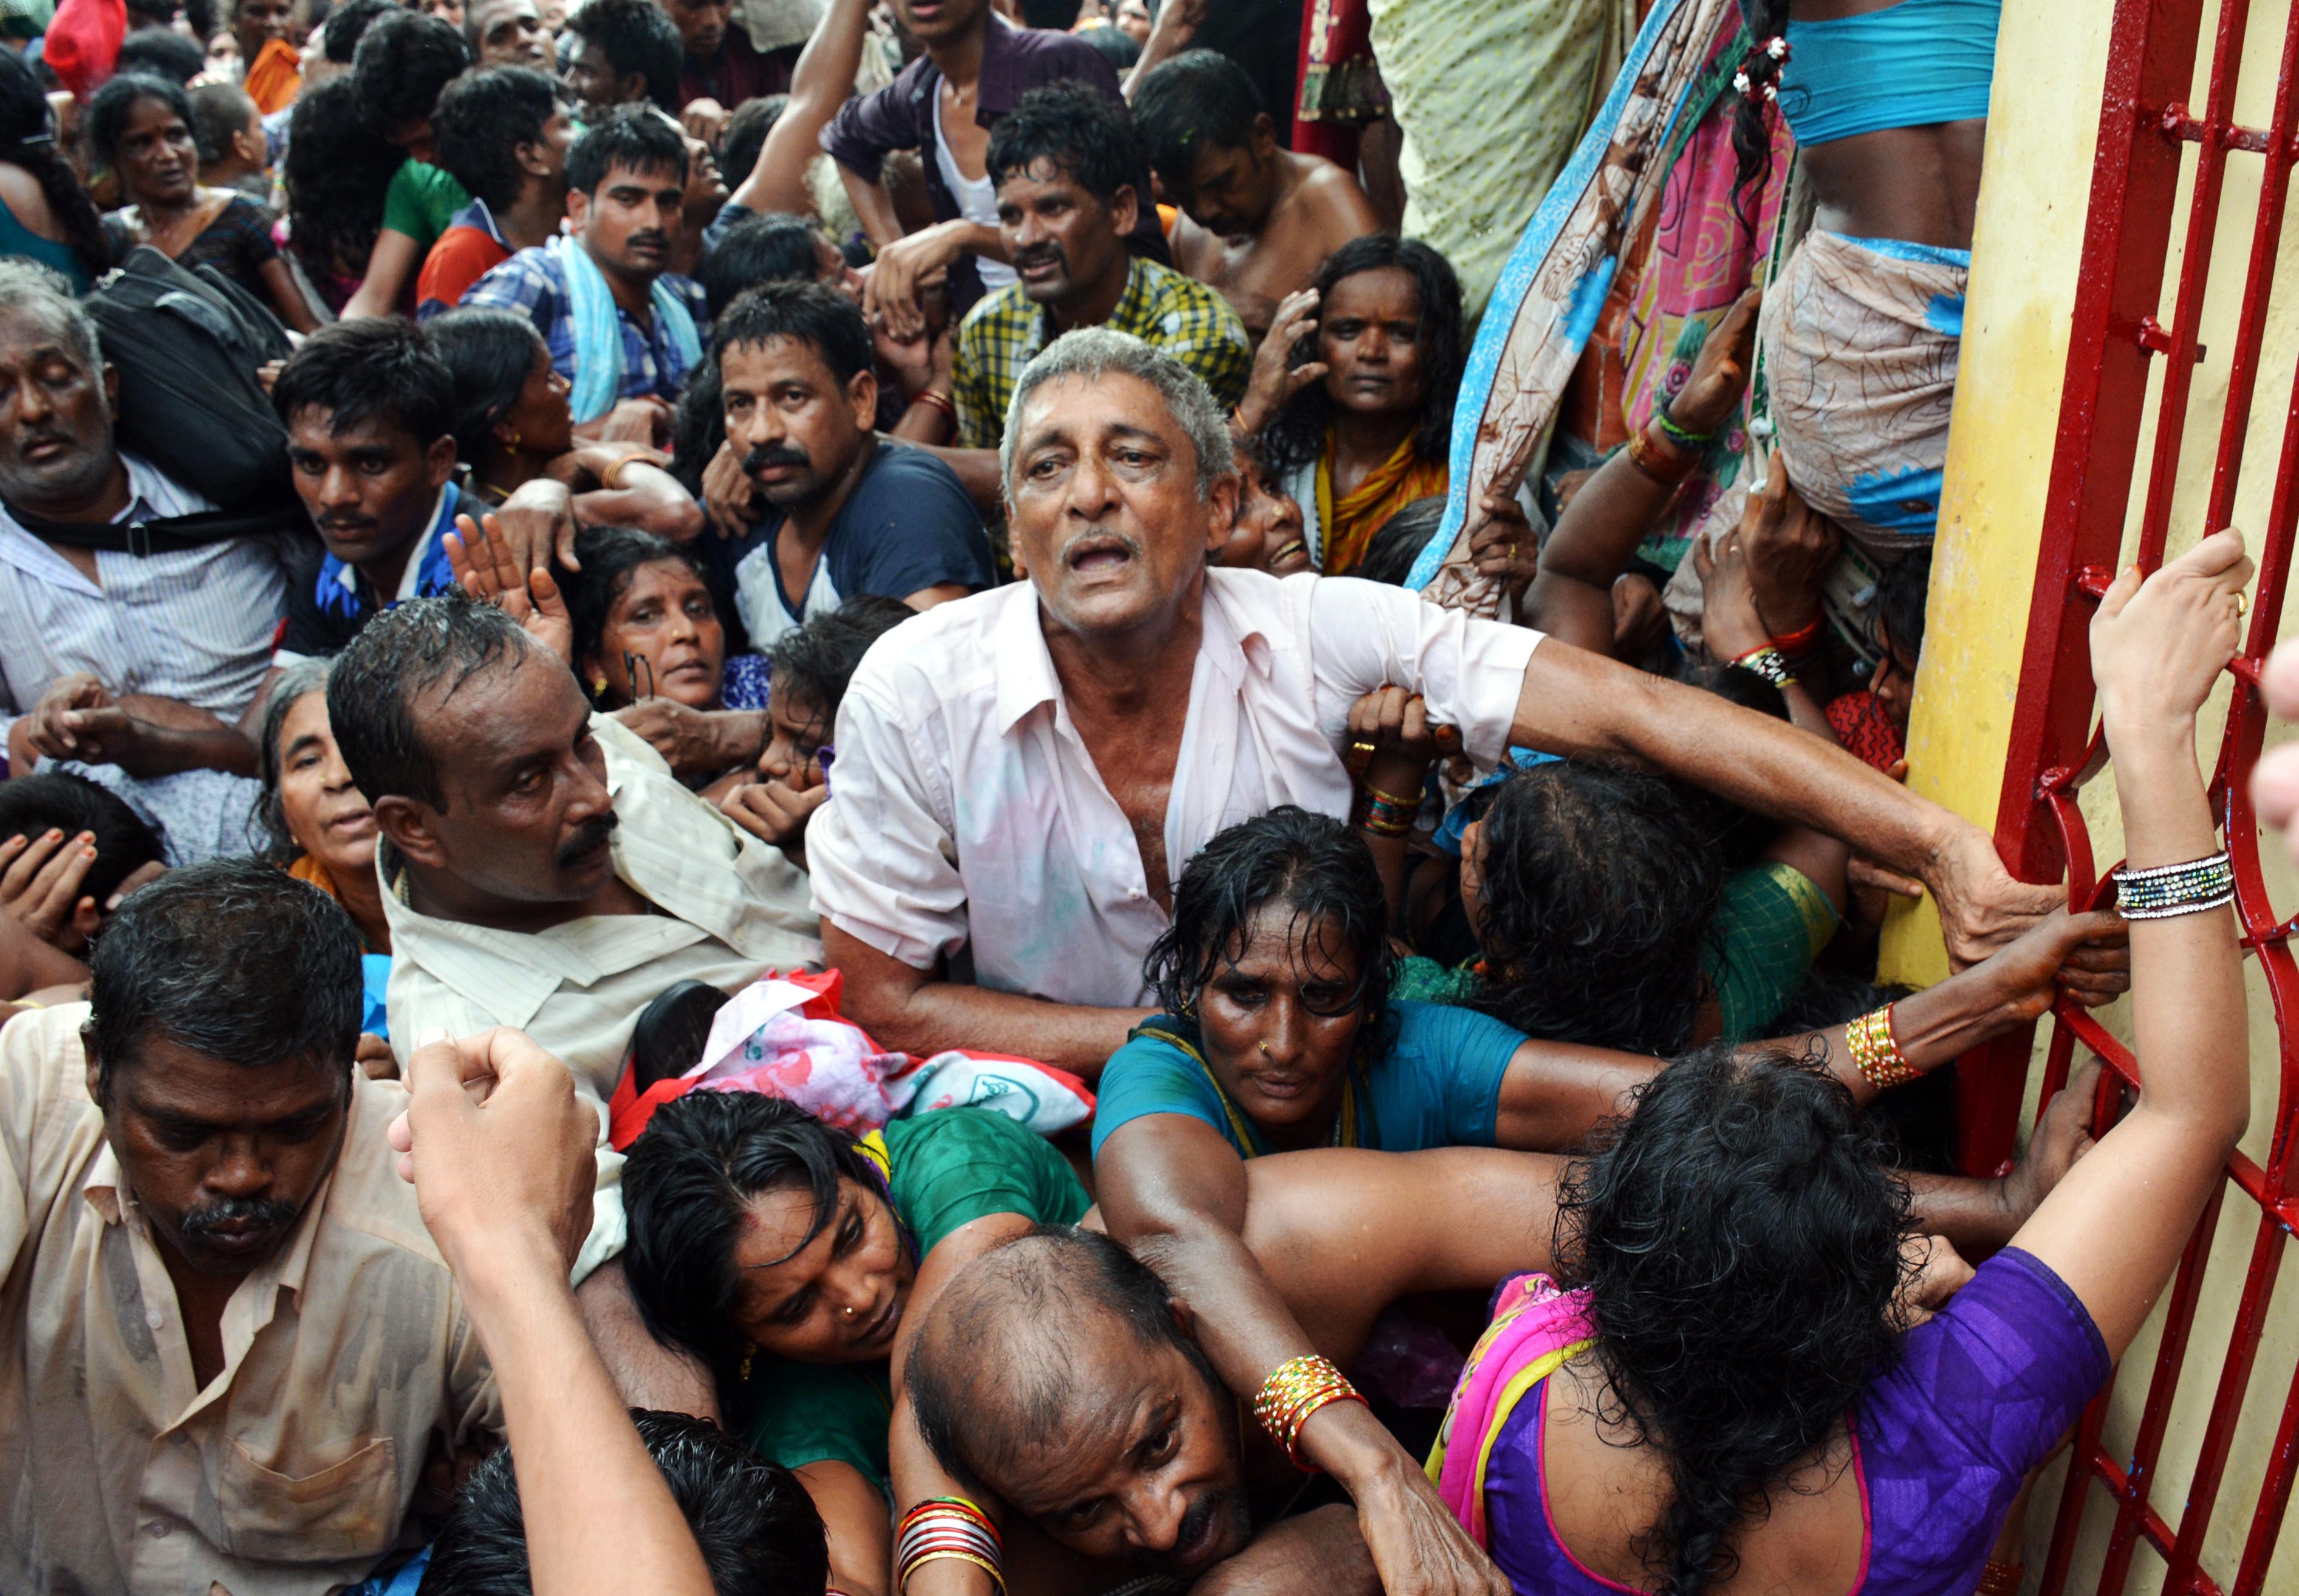 Indian devotees gather after a stampede at a religious festival in Godavari in the Rajahmundry district some 200 kms north-east of Hyderabad on July 14, 2015. (STRDEL—AFP/Getty Images)